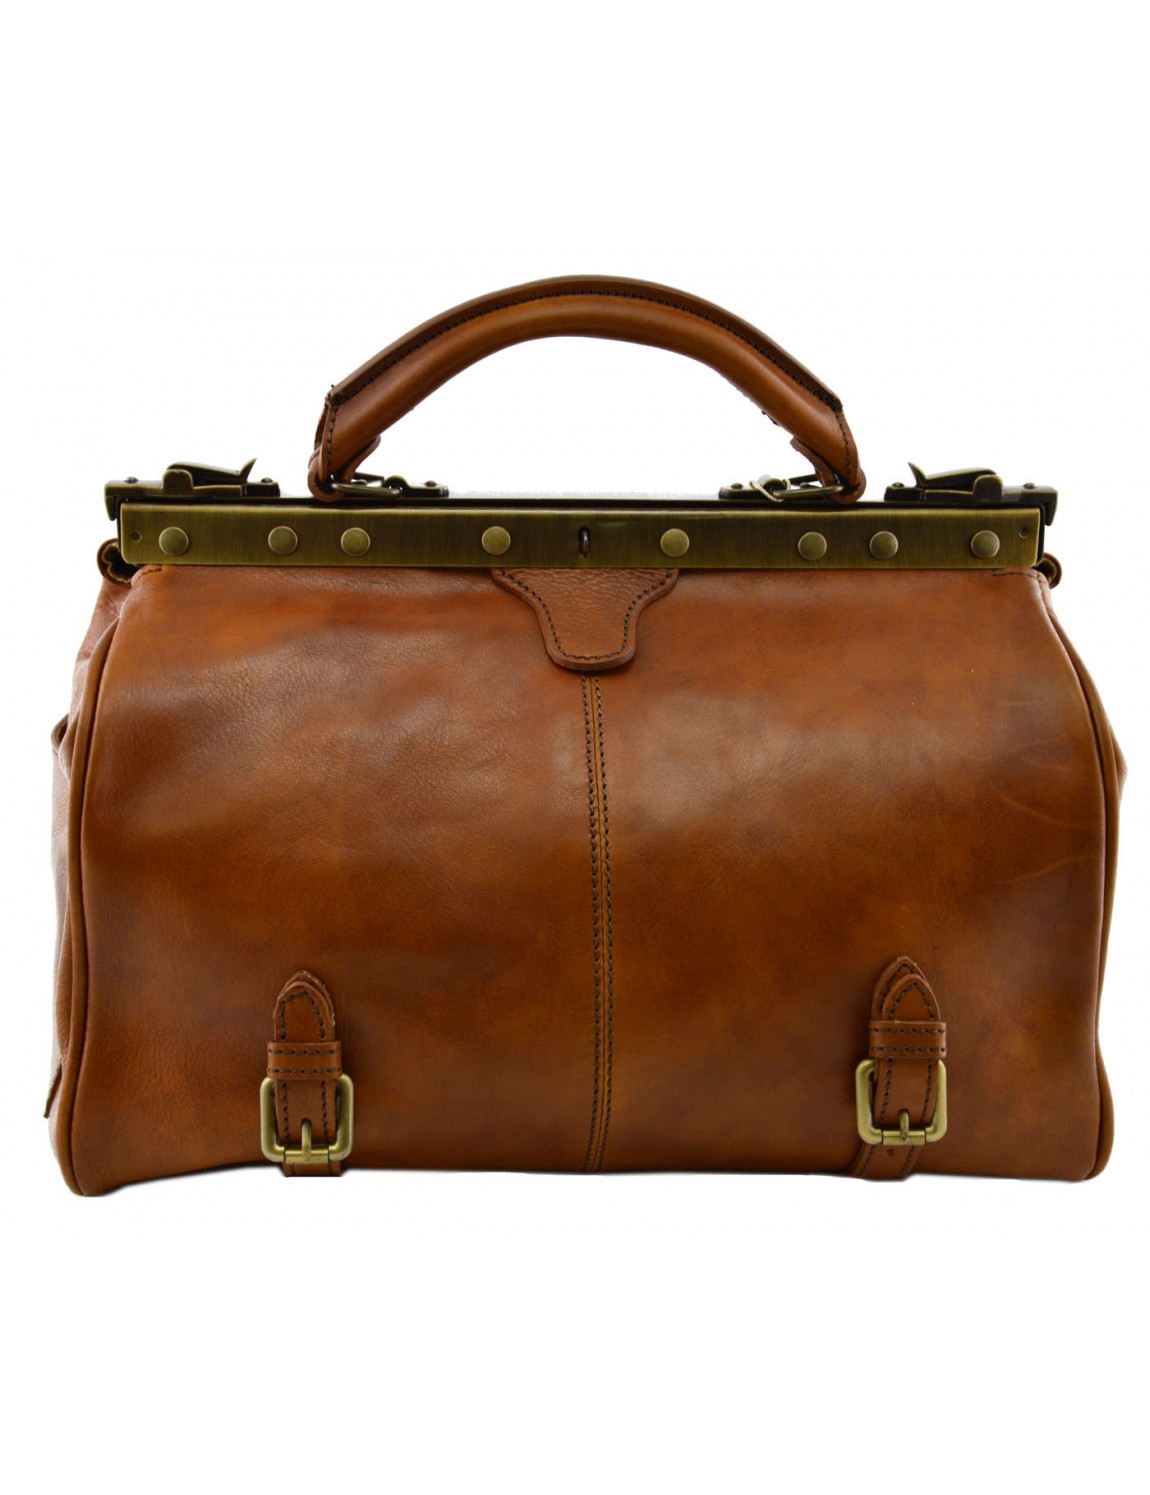 Giżycko leather doctor bag The Old America style makes this leather doctor bag a must-have in every type of style and occasion.